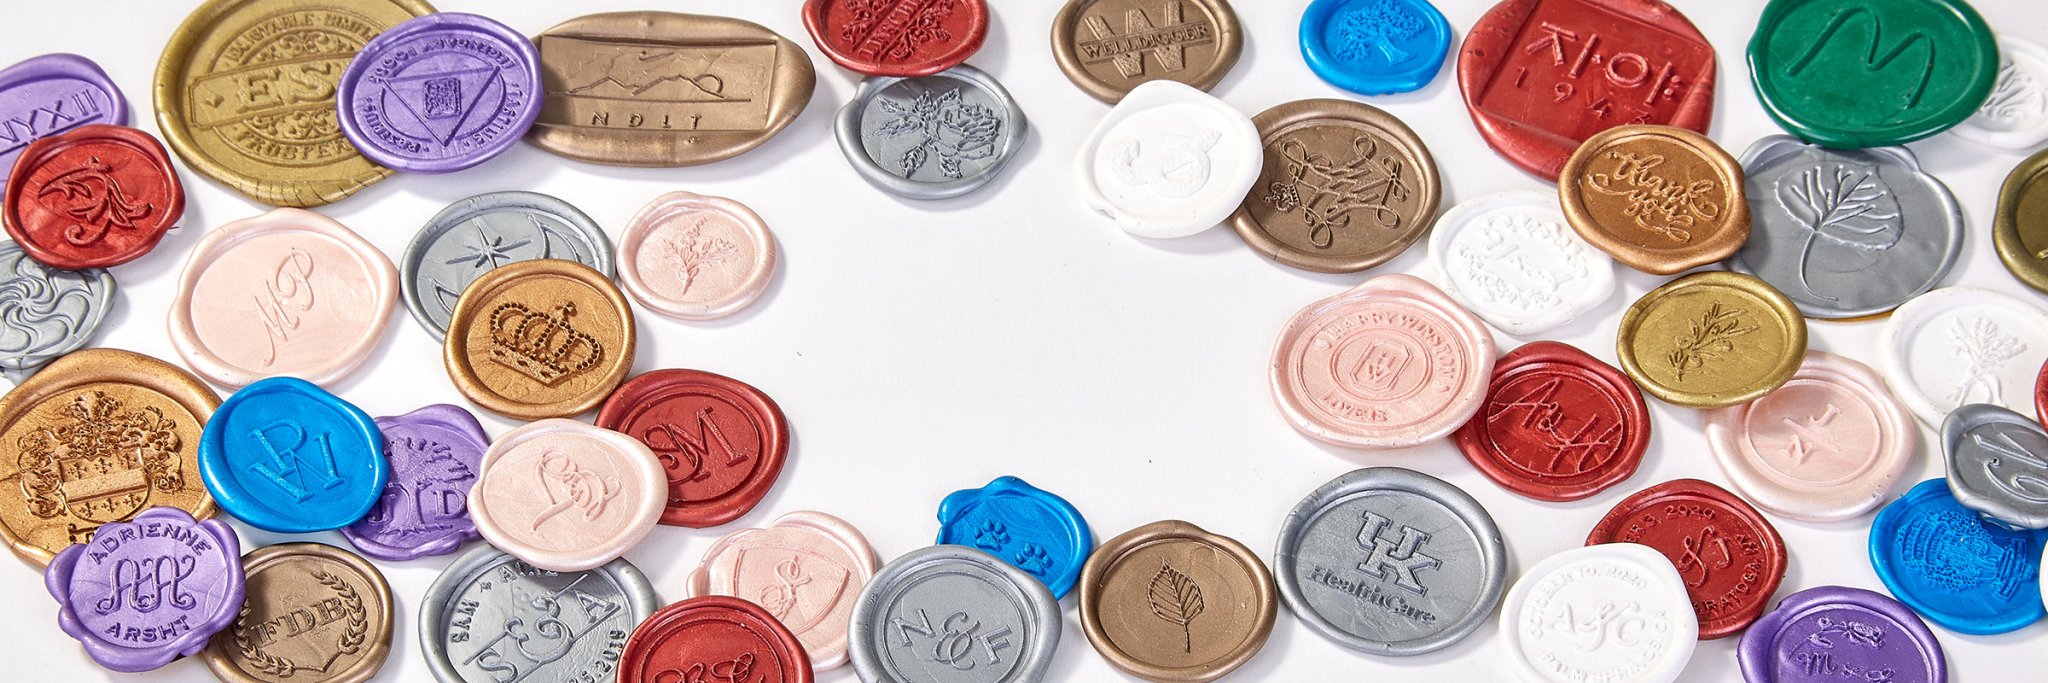 Adhesive Wax Seal Stickers with your Logo or Art-Standard Sizes 3/4, 1  and 1 1/4 Finished Size, Nostalgic Impressions